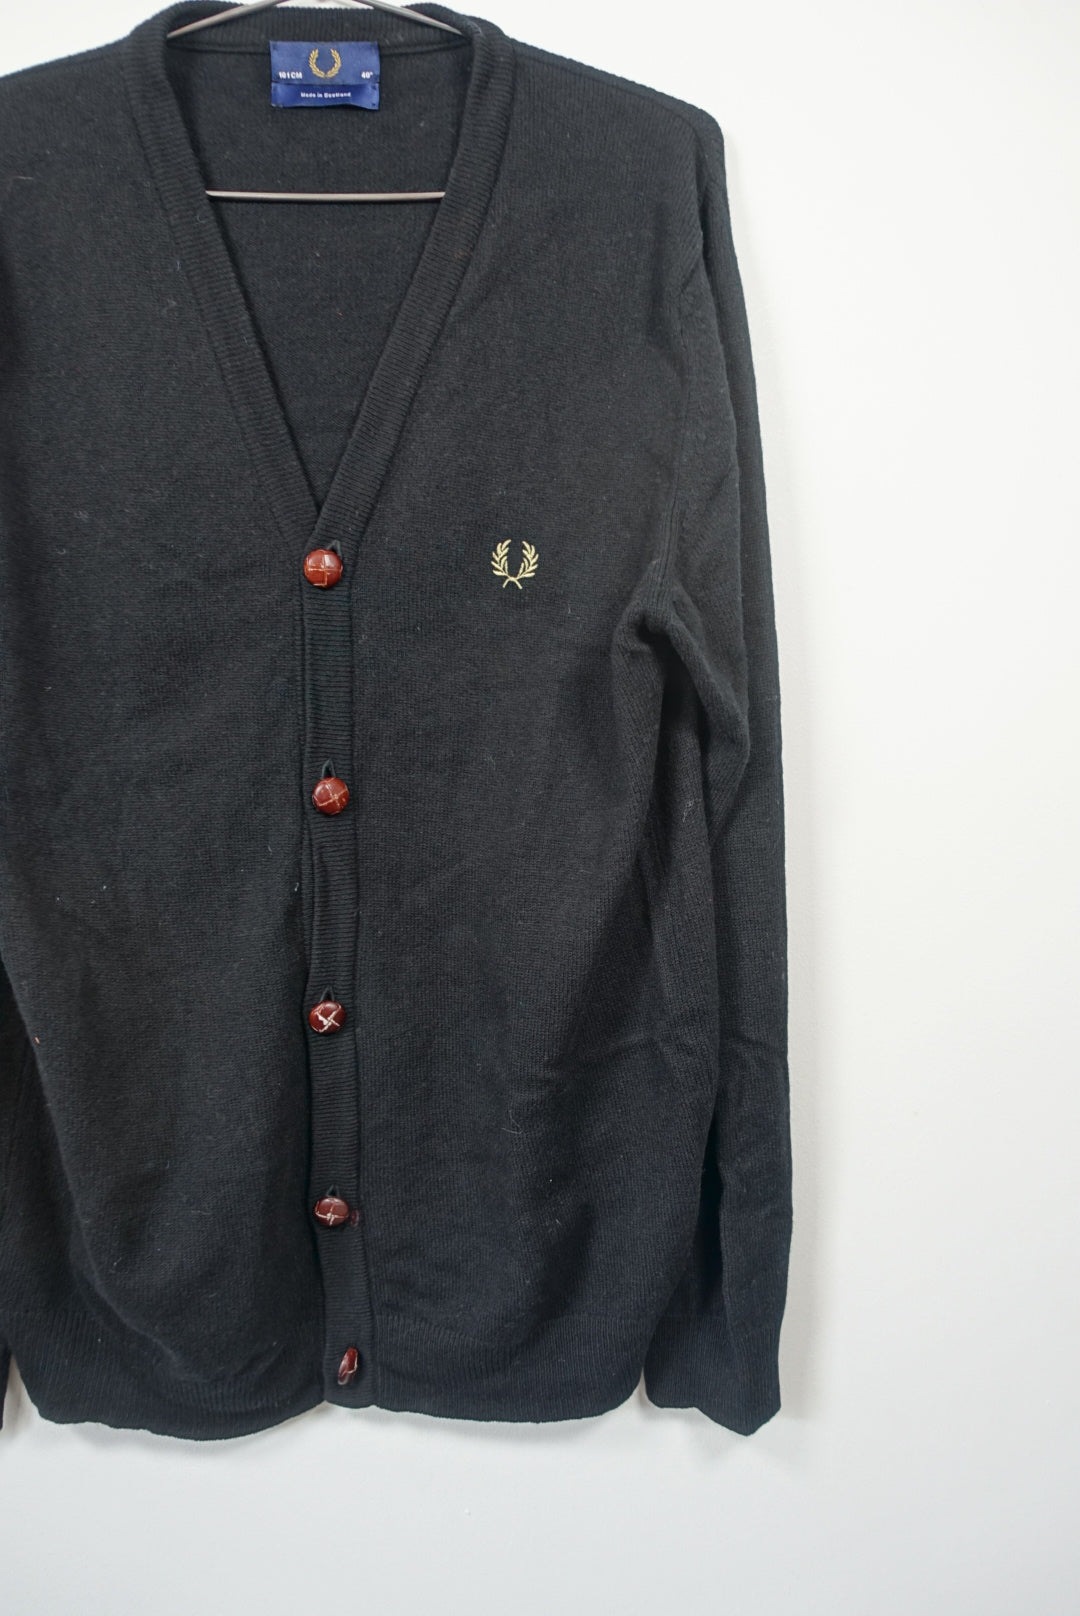 Fred Perry Fine Knit Cardigan